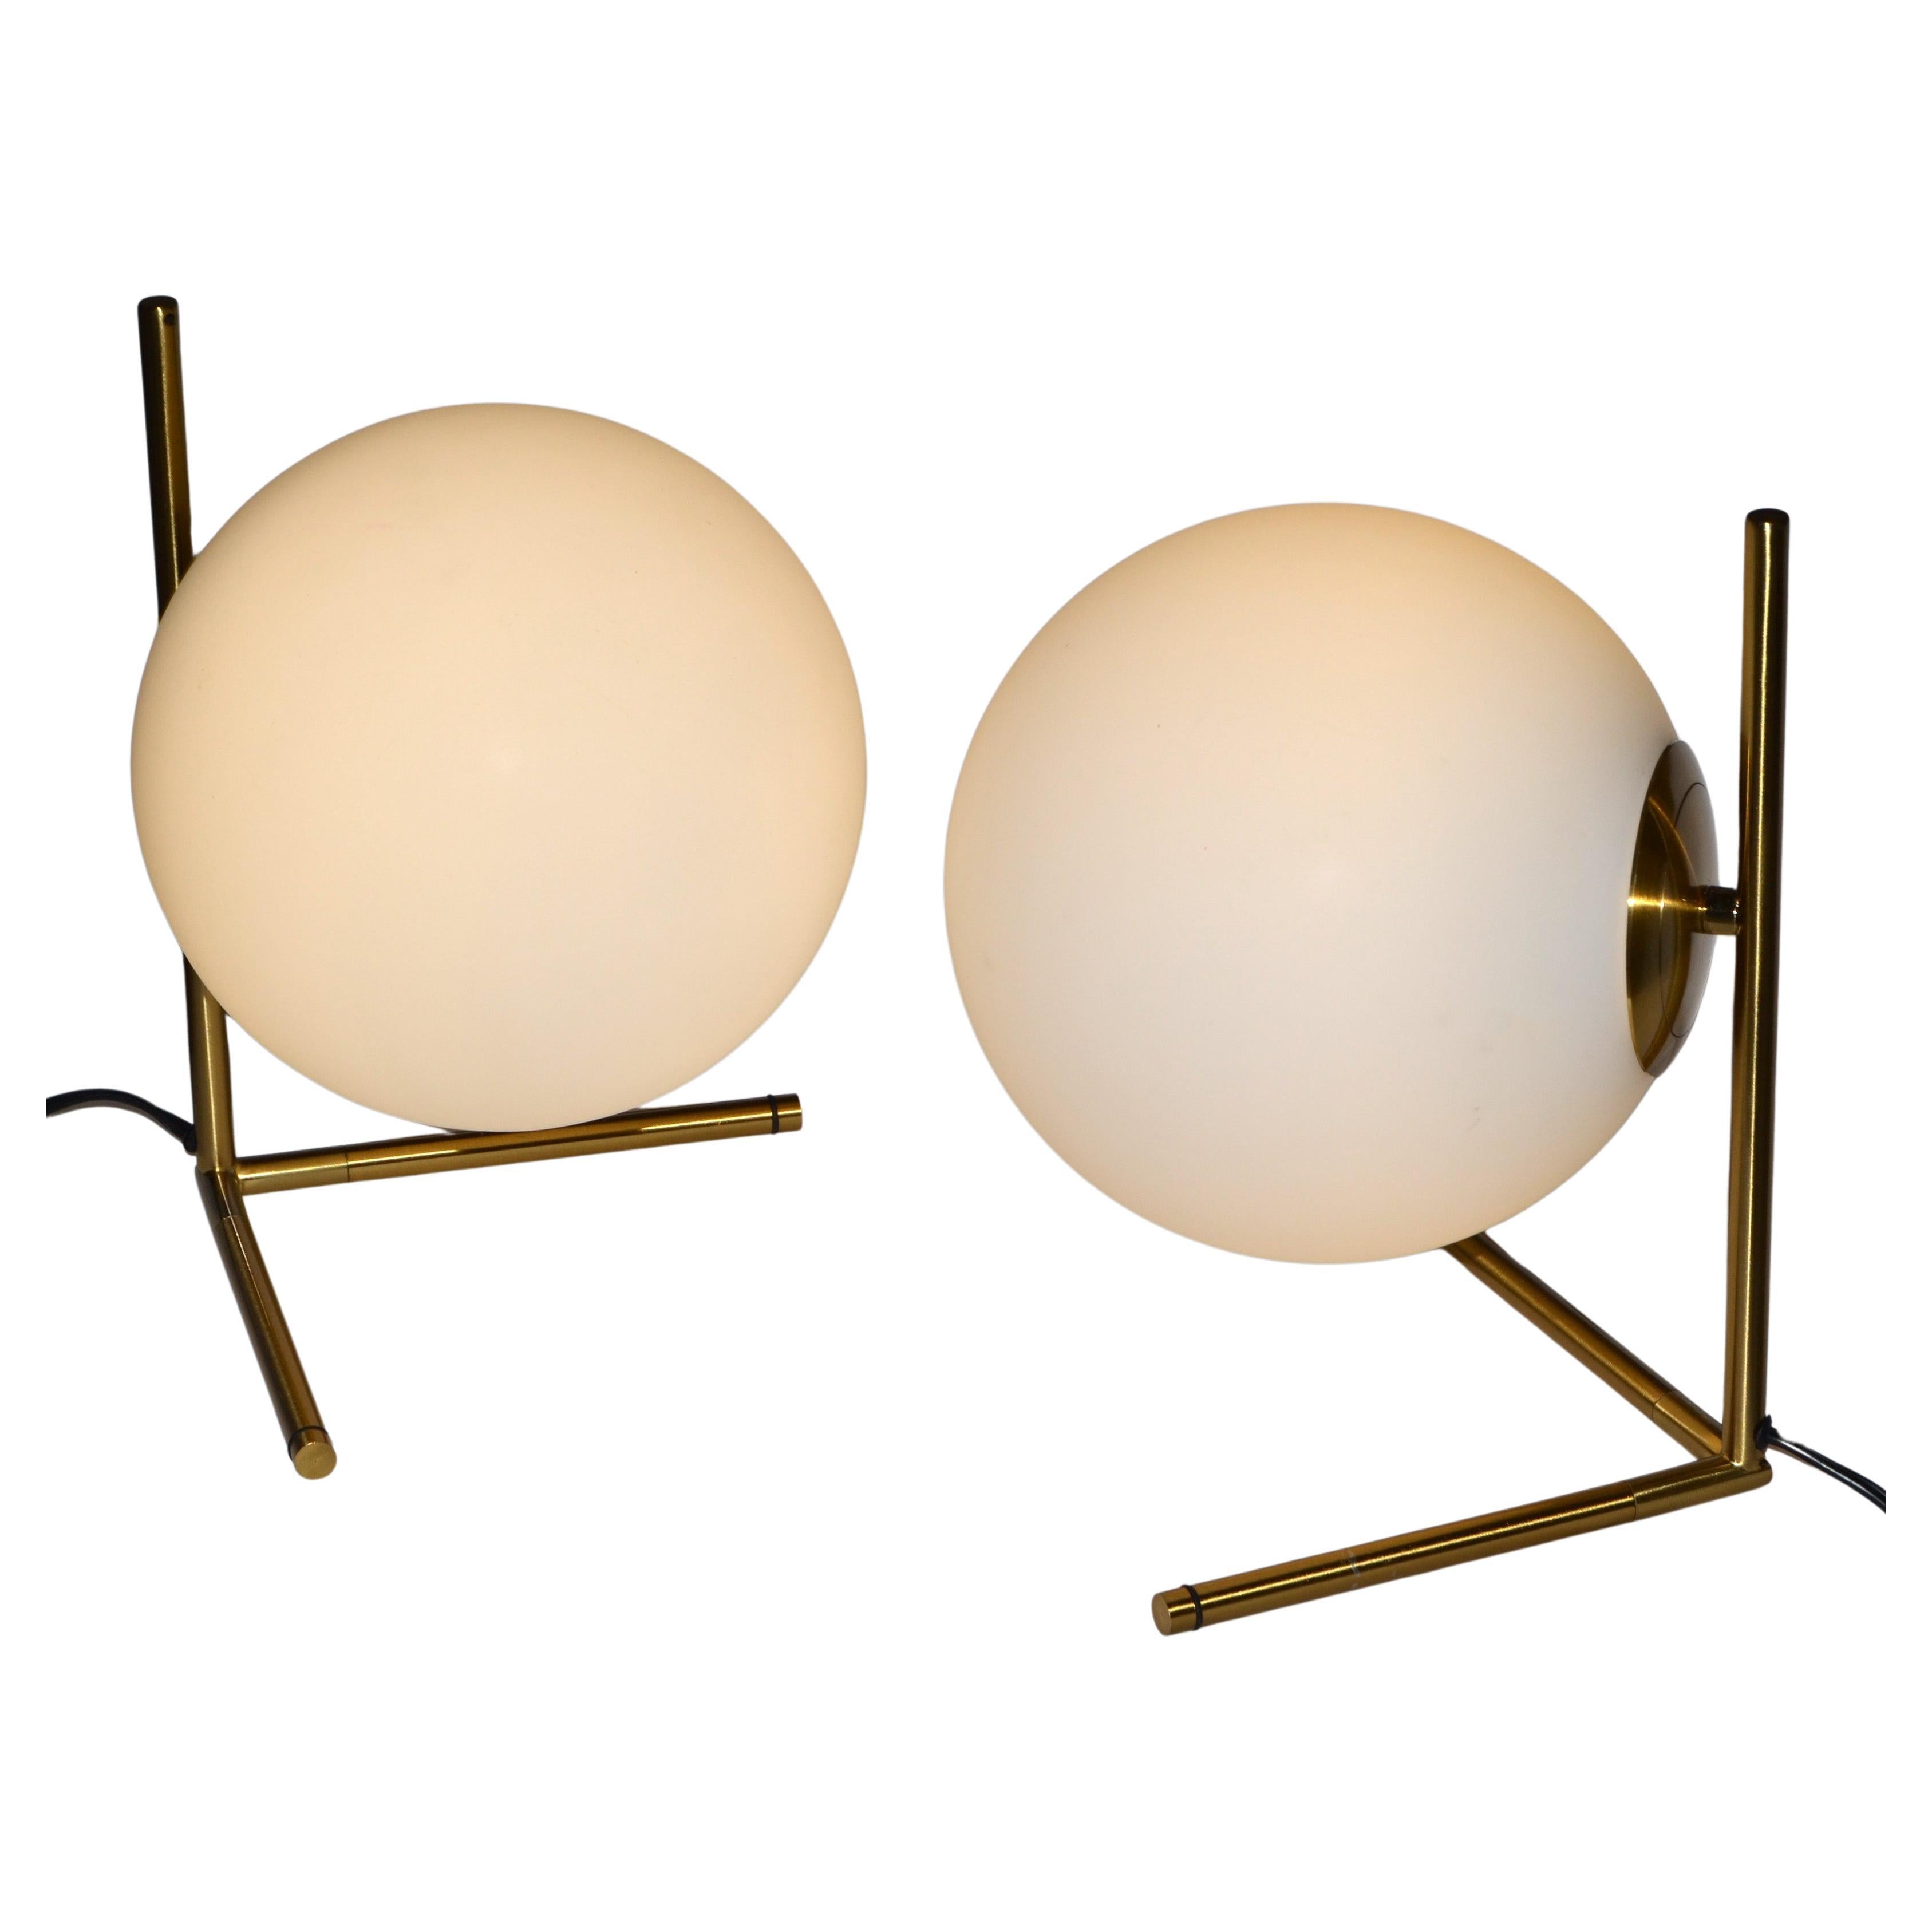 Minimalist right and left angle Table Lamps, Office Lighting in Steel Frame with Brass Finish and frosted Glass Globes in the Style of Stilnovo.  
Space Age attributed Pair of desk lamps in unique and modern design that looks great with any decor.